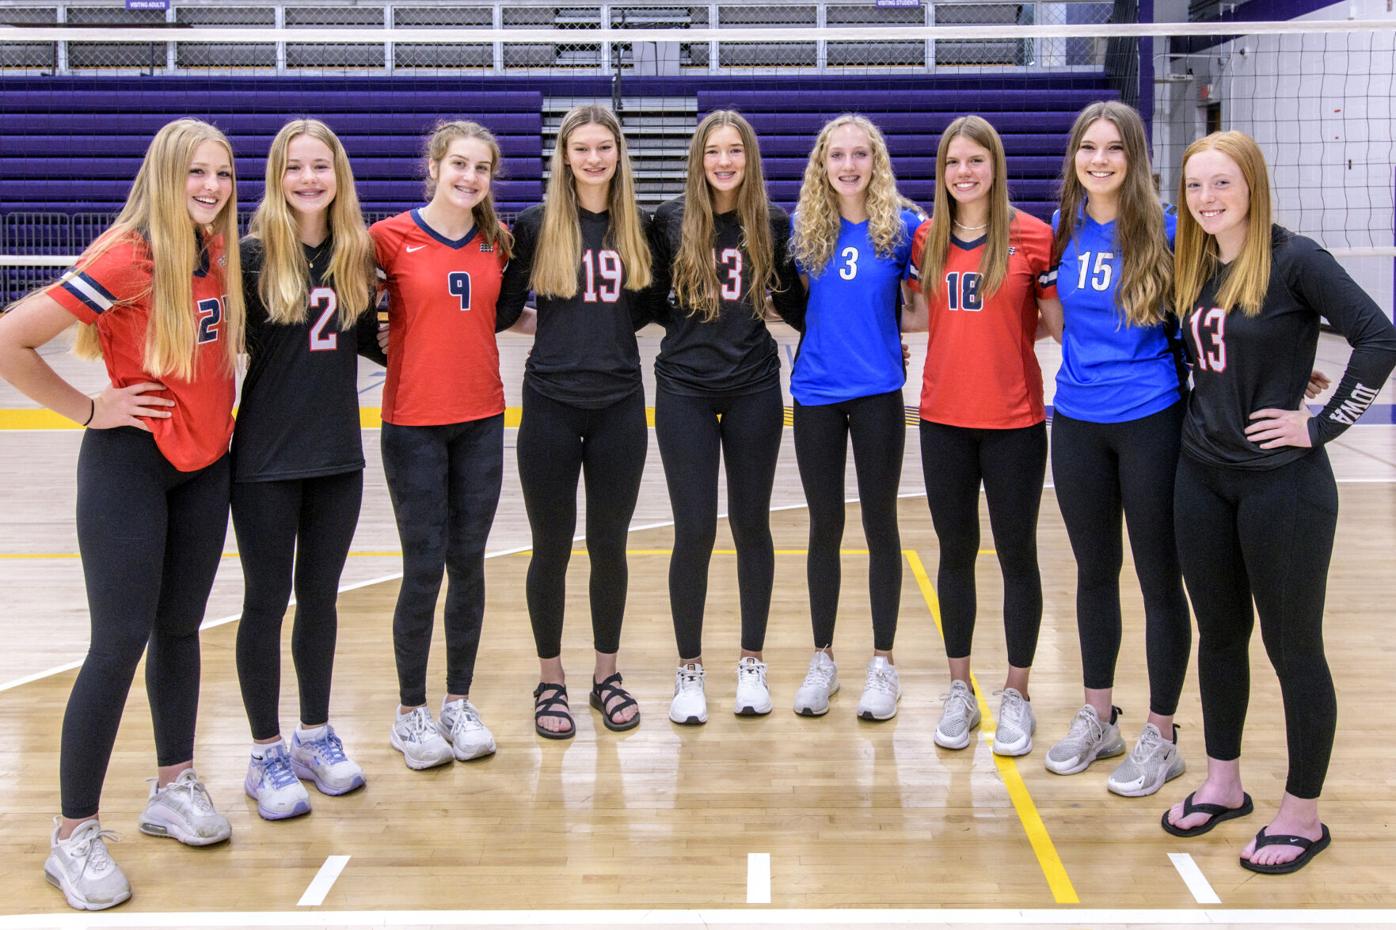 Indianola girls take separate routes to volleyball nationals, News